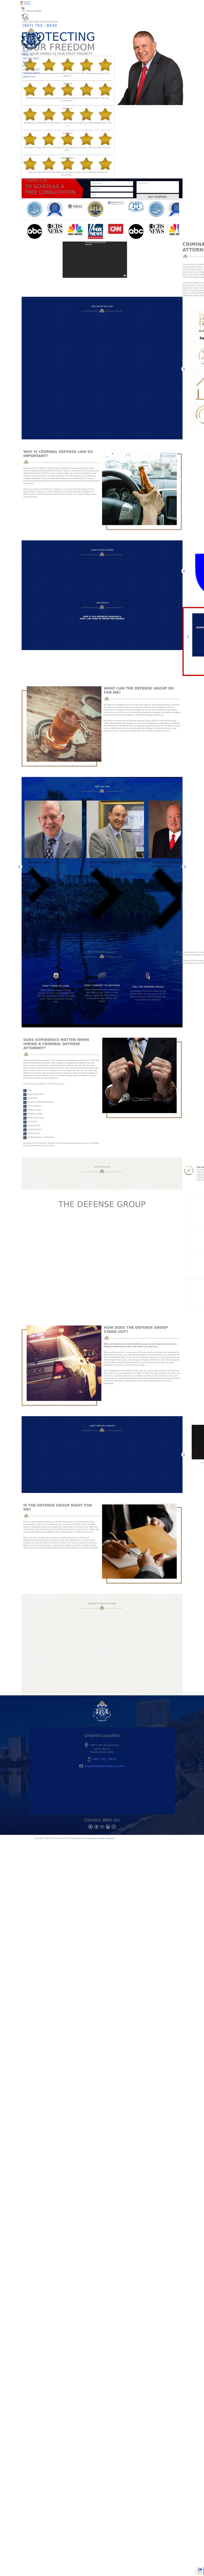 The Defense Group - Kissimmee FL Lawyers